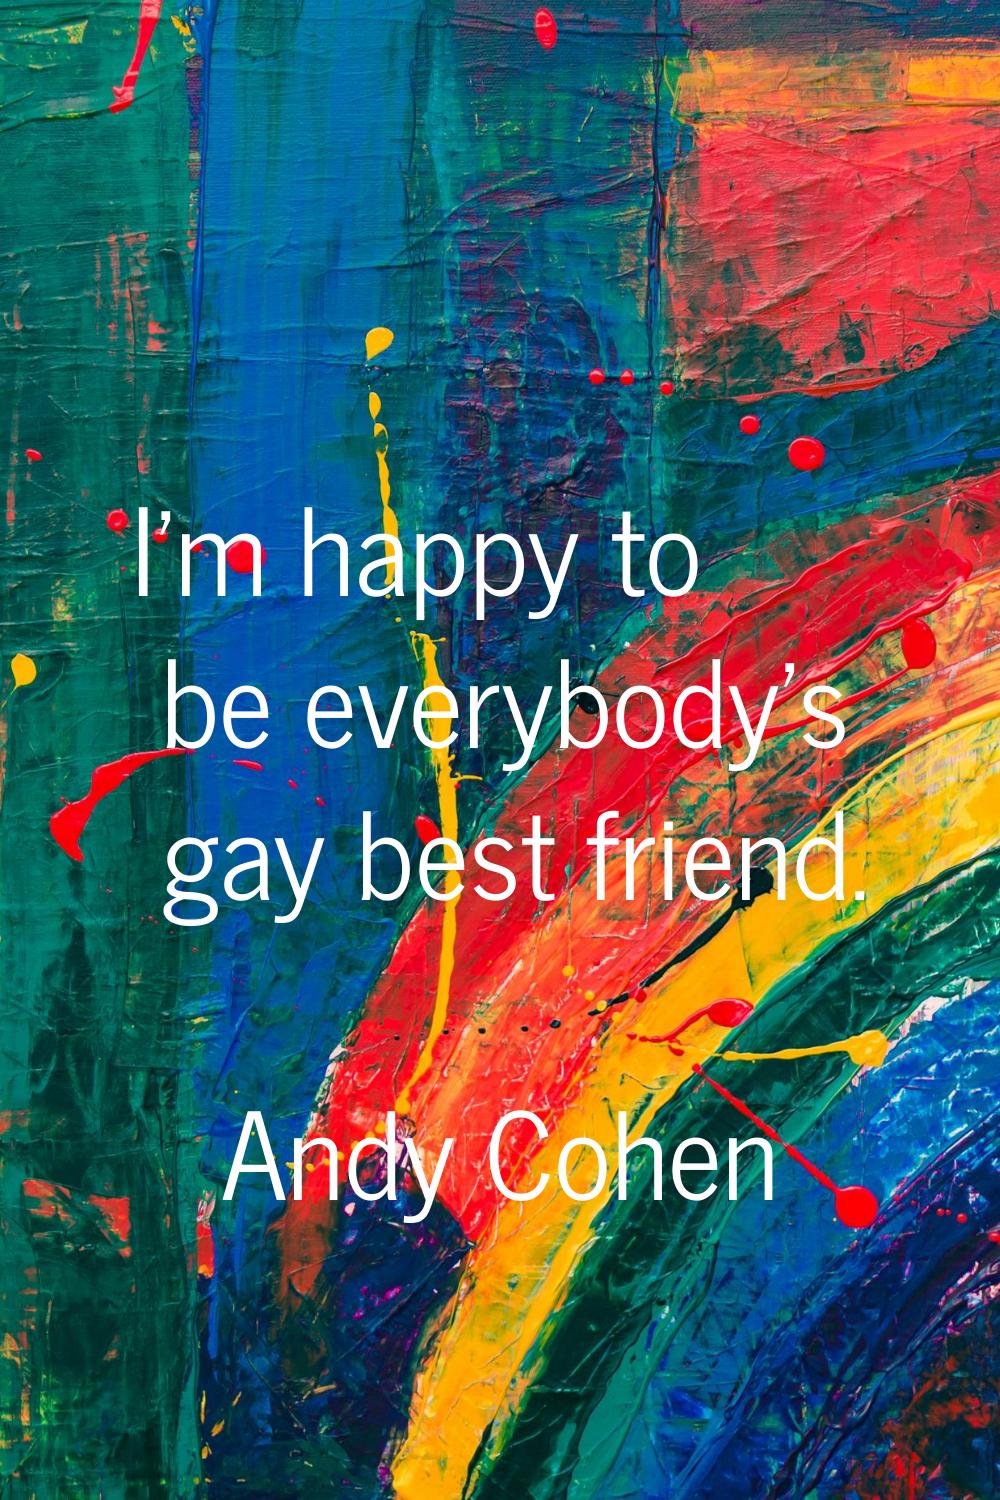 I'm happy to be everybody's gay best friend.